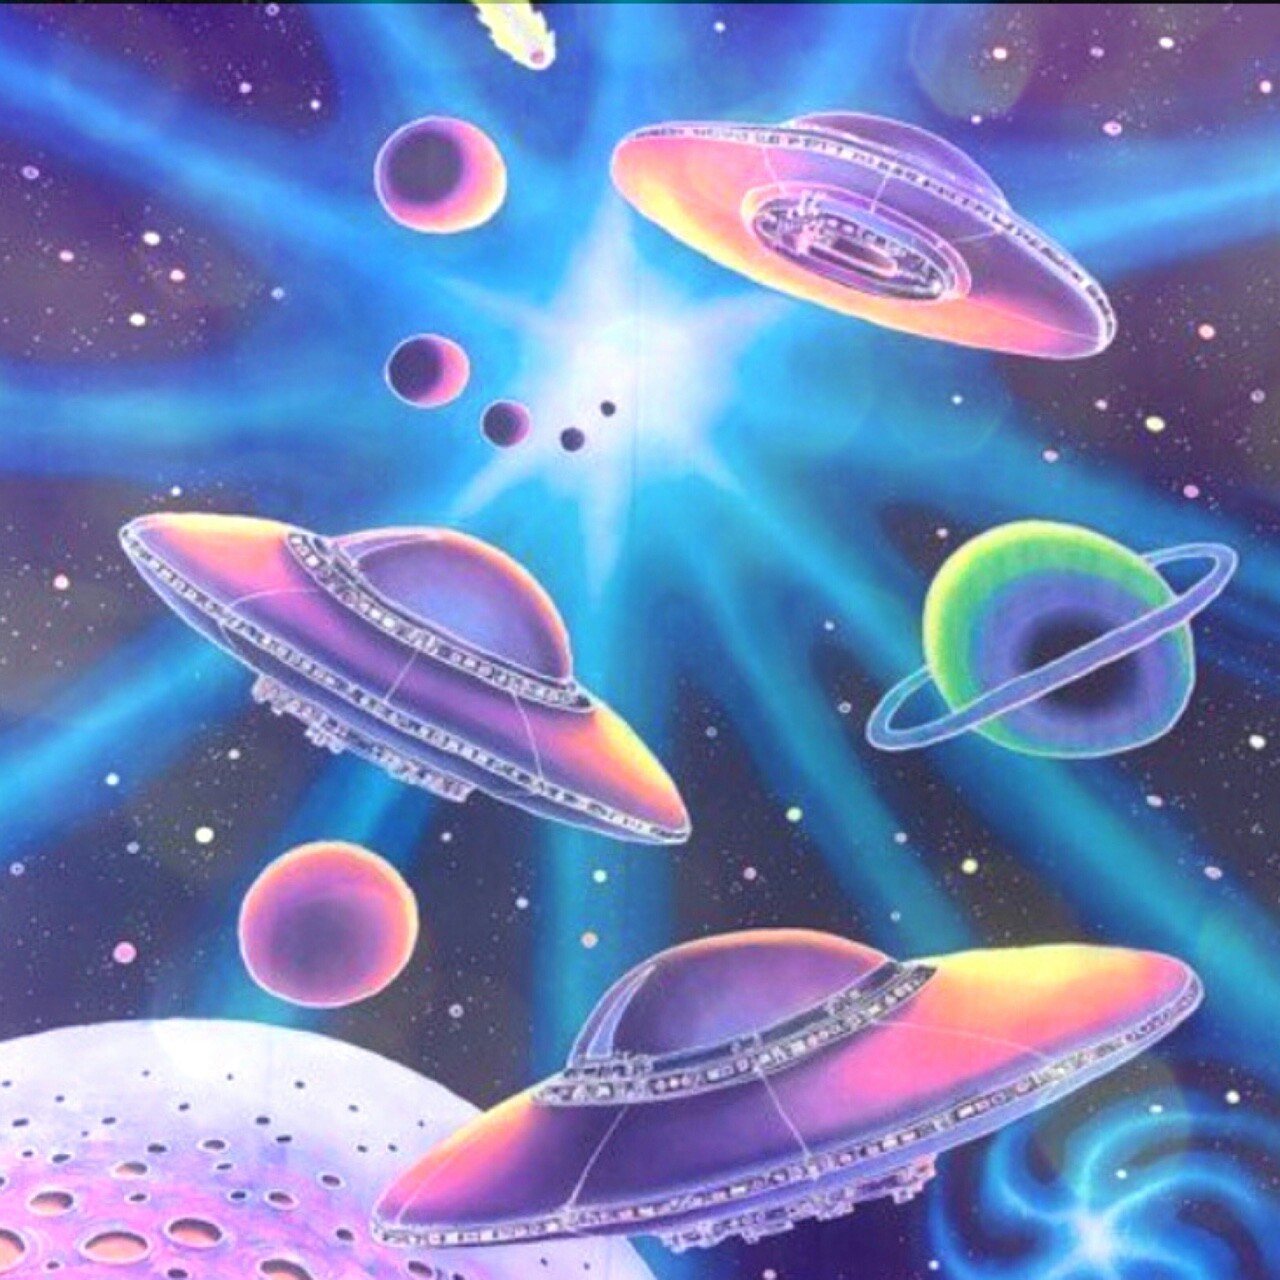 Space, Alien, And Ufo Image - Ufo Trippy , HD Wallpaper & Backgrounds